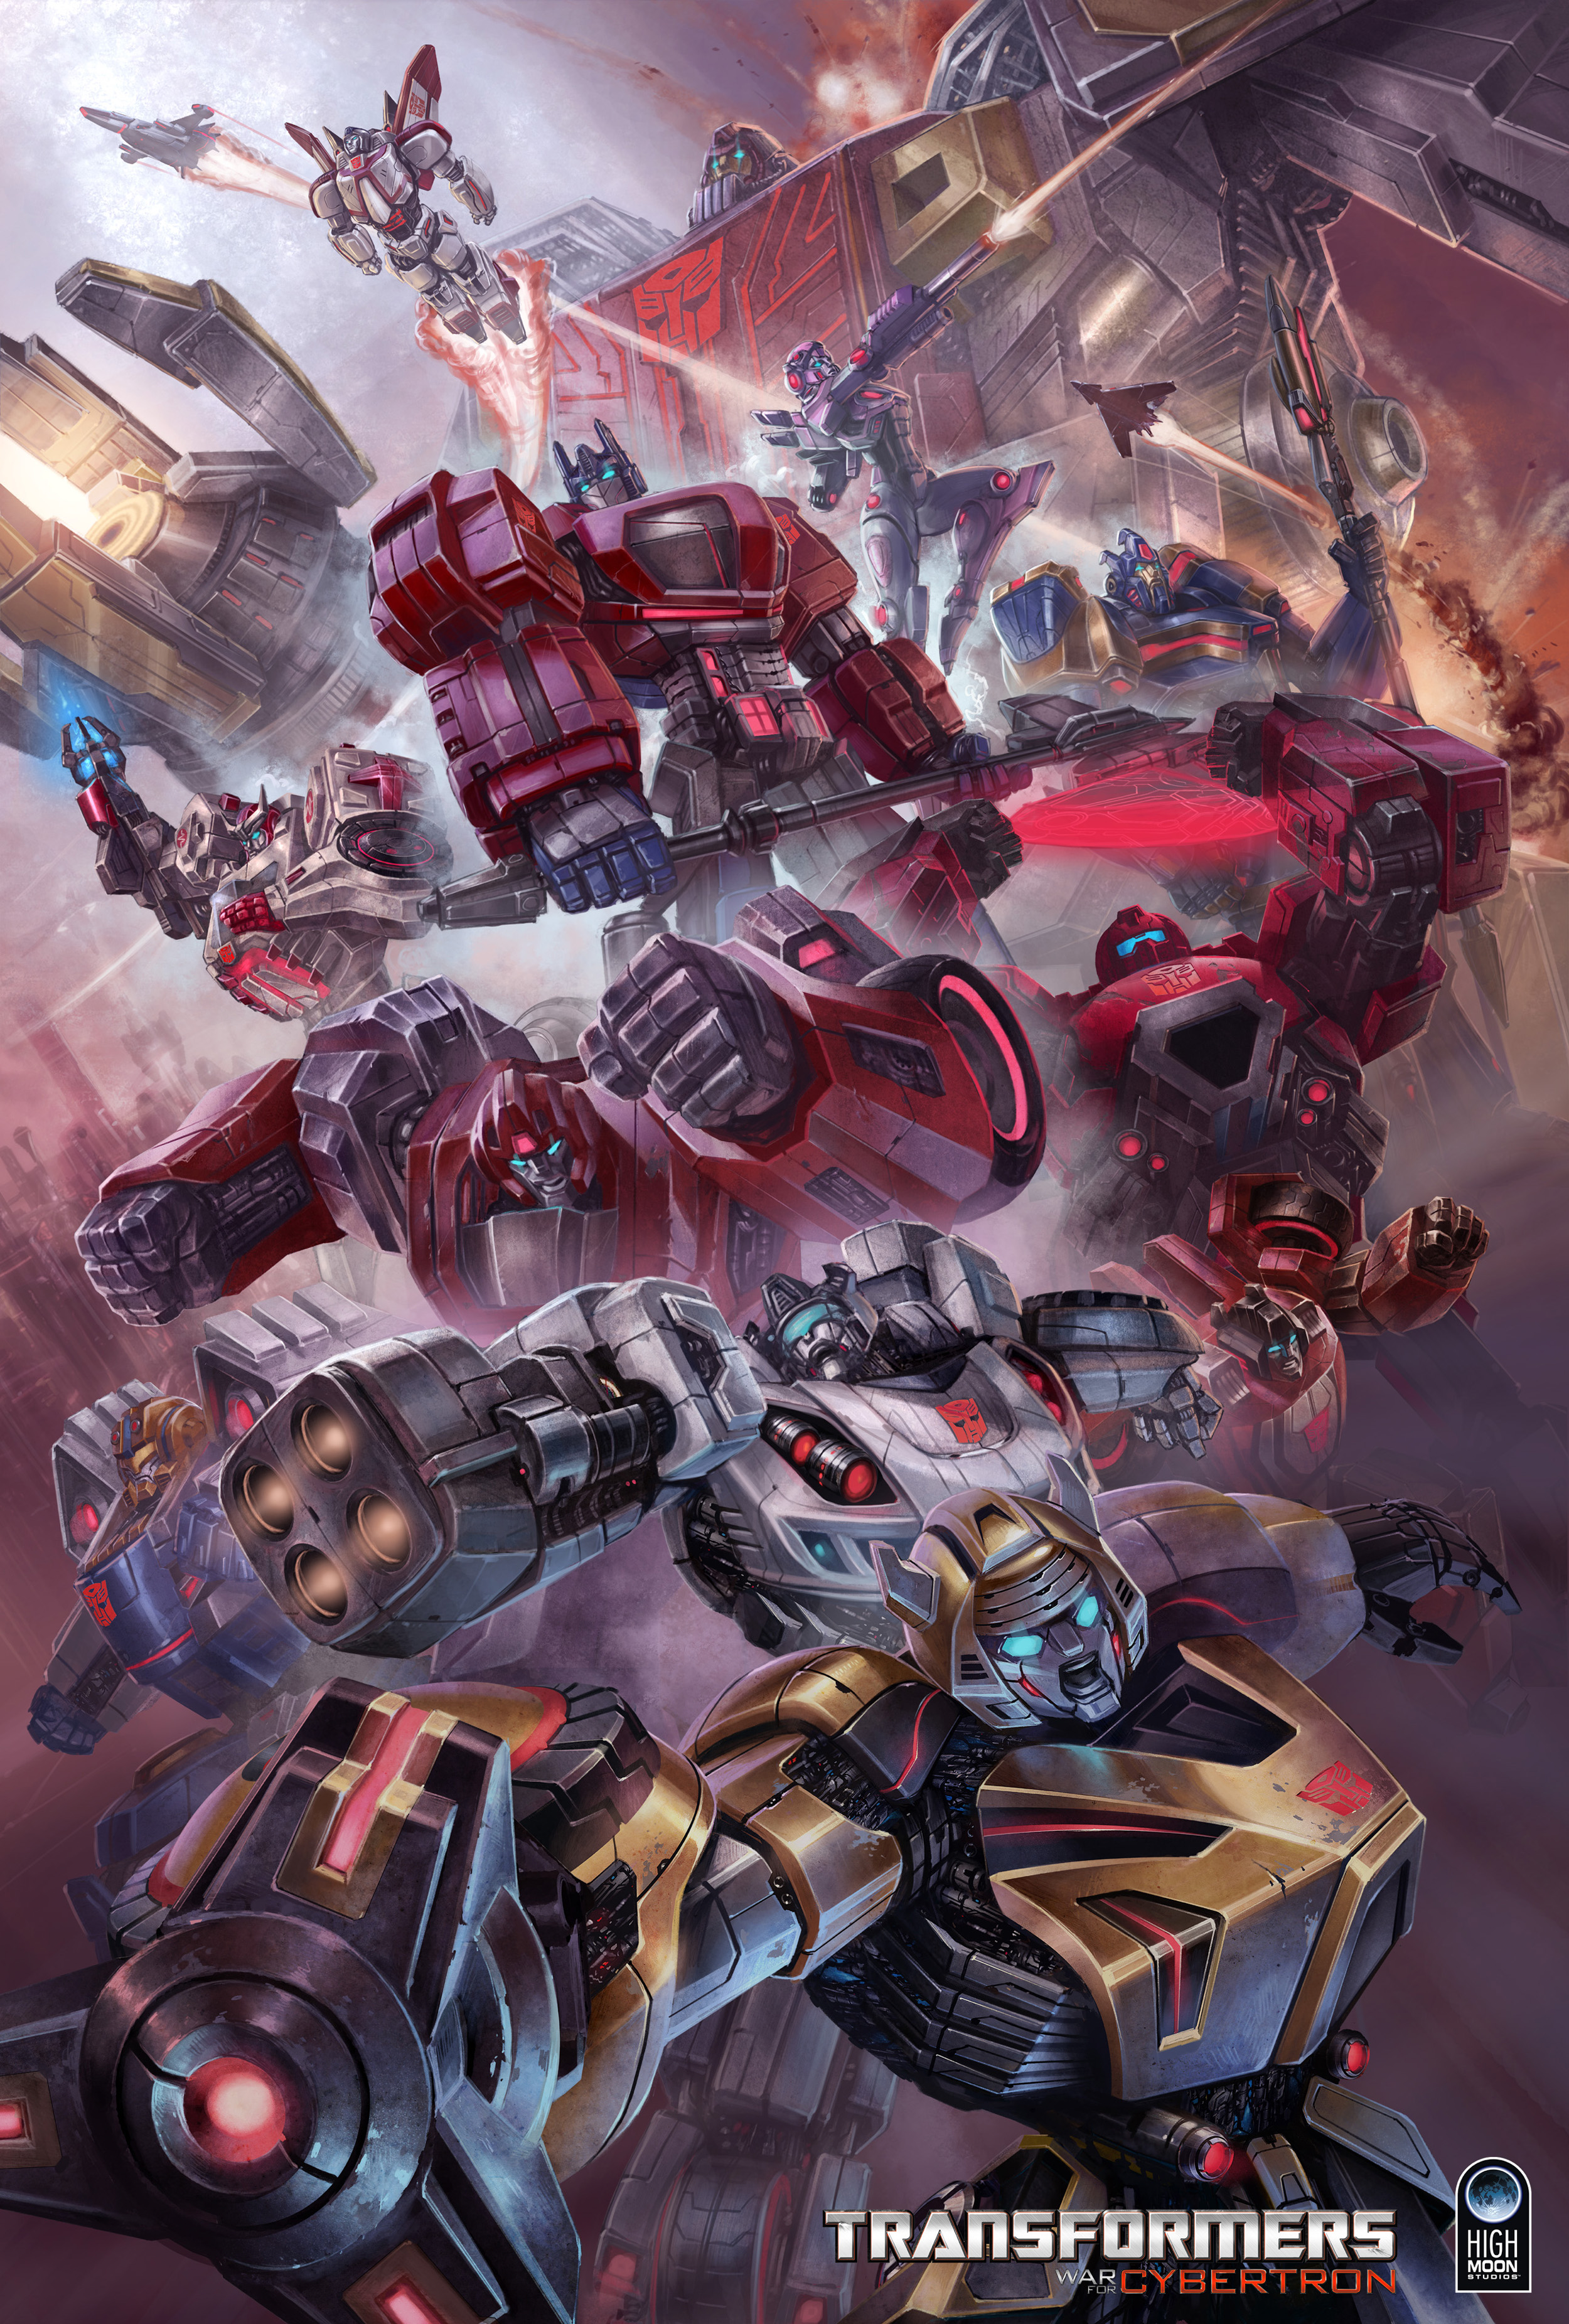 Transformers: War for Cybertron 10x XP Posters and Wallpapers